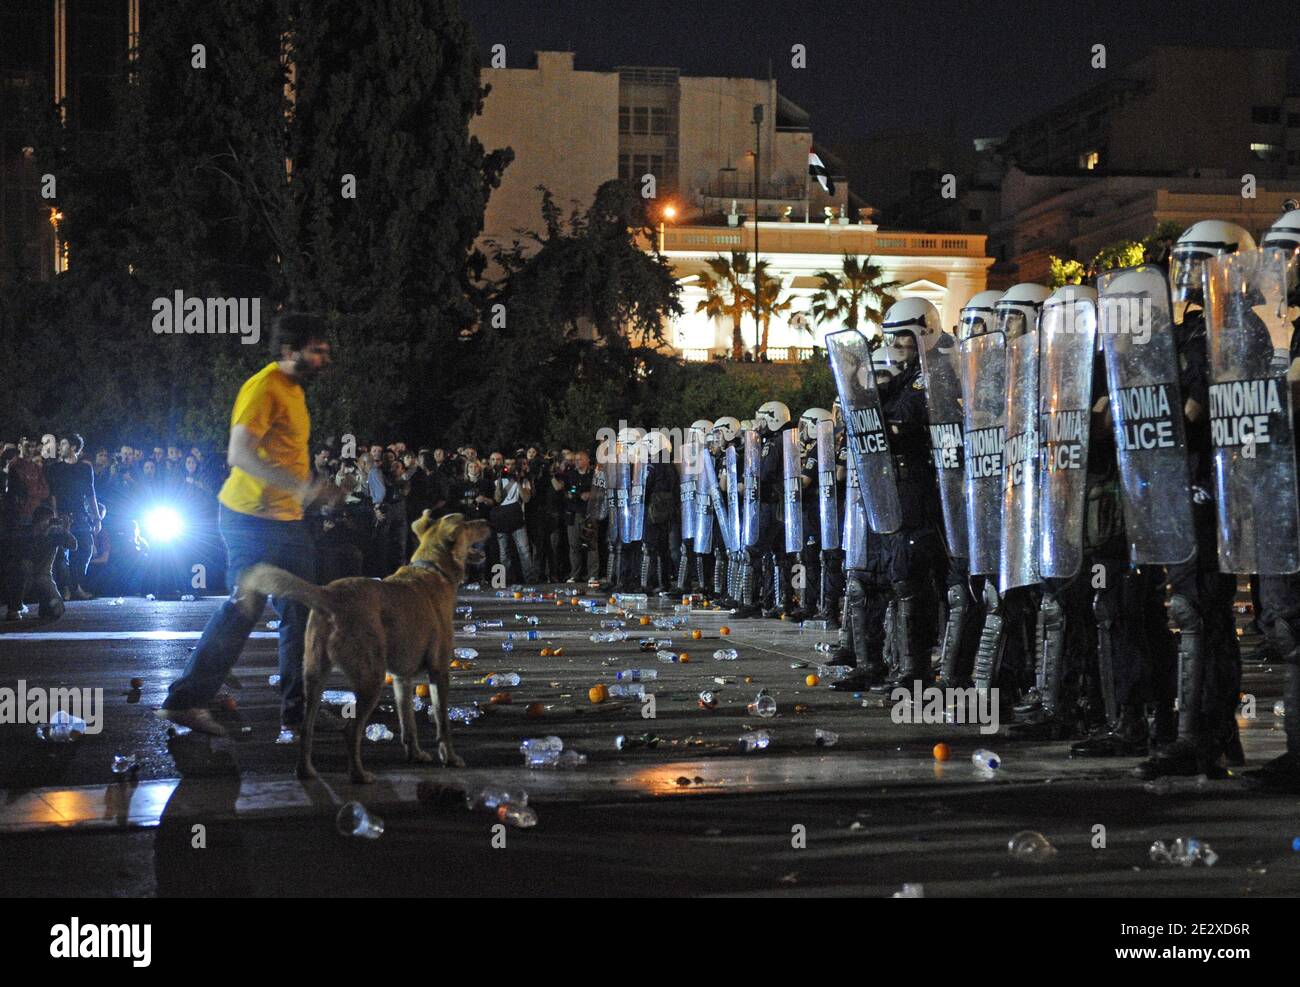 Greek riot policemen clash with protestors front the parliament in Athens, Greece on May 6, 2010. Riots broke out across the Greek capital during a massive protest against drastic austerity measures introduced to secure rescue loans for the country's near-bankrupt economy. Photo by Mousse/ABACAPRESS.COM Stock Photo